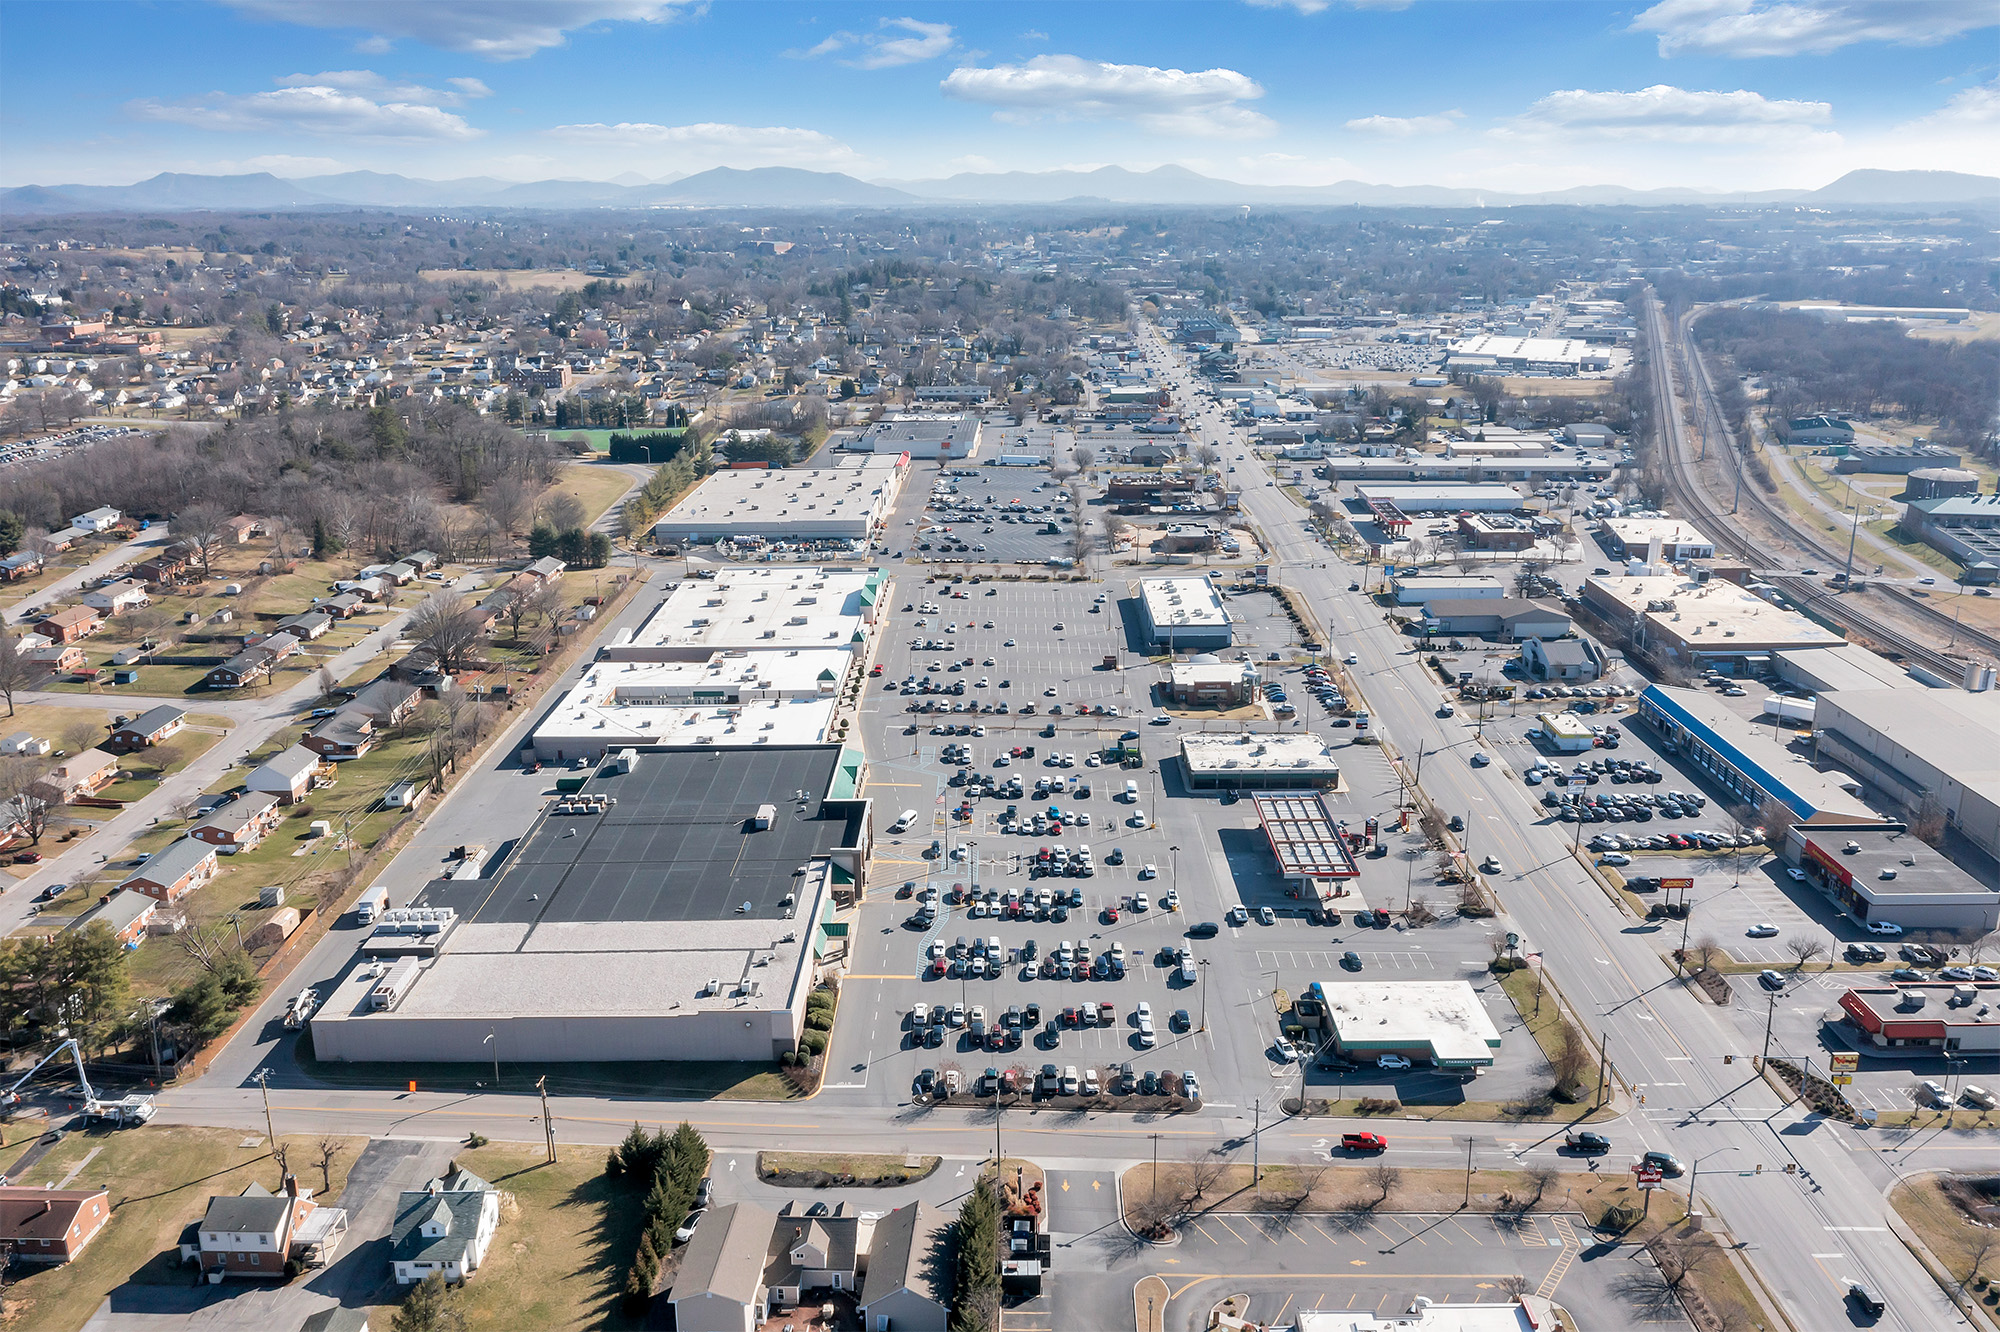 Drone view of Spartan Square with mountains in the distance.